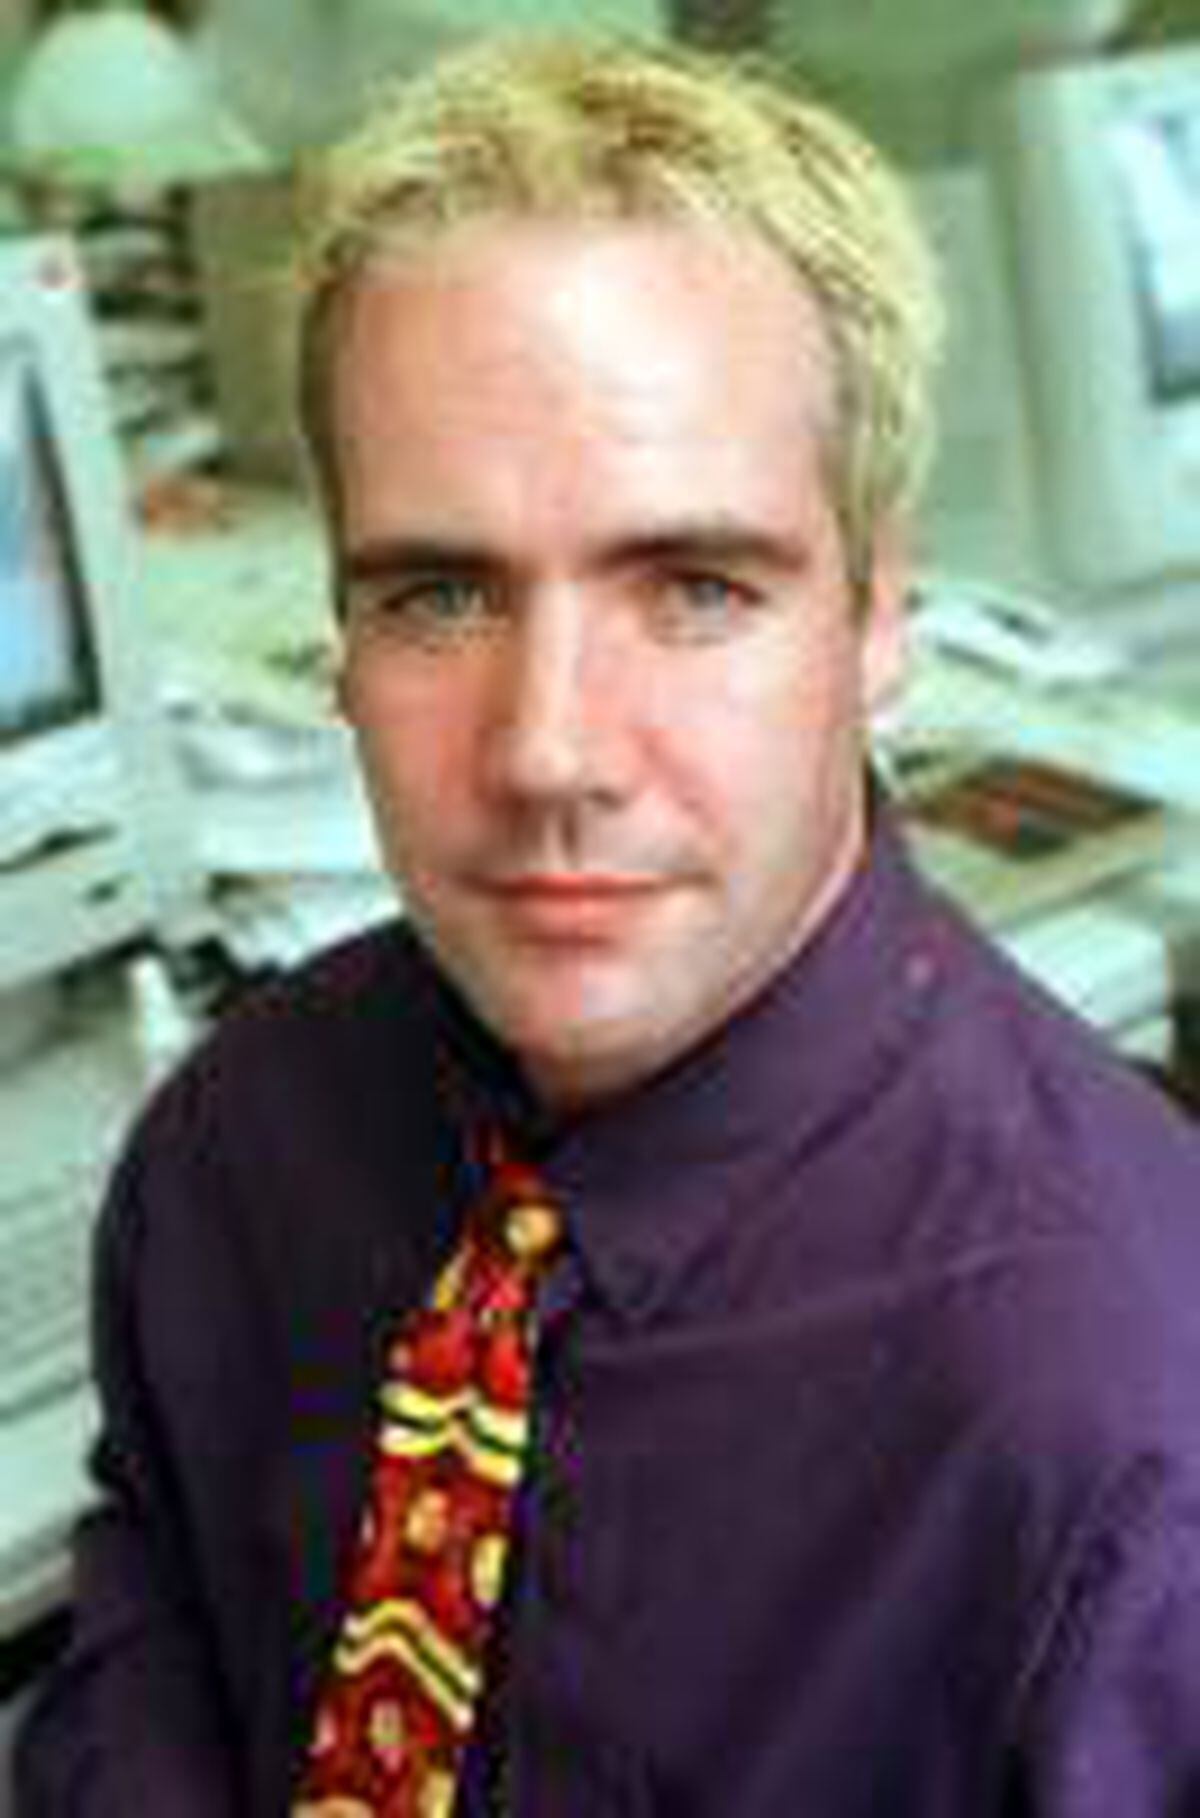 Mark Allen during his time as a reporter at the Express & Star